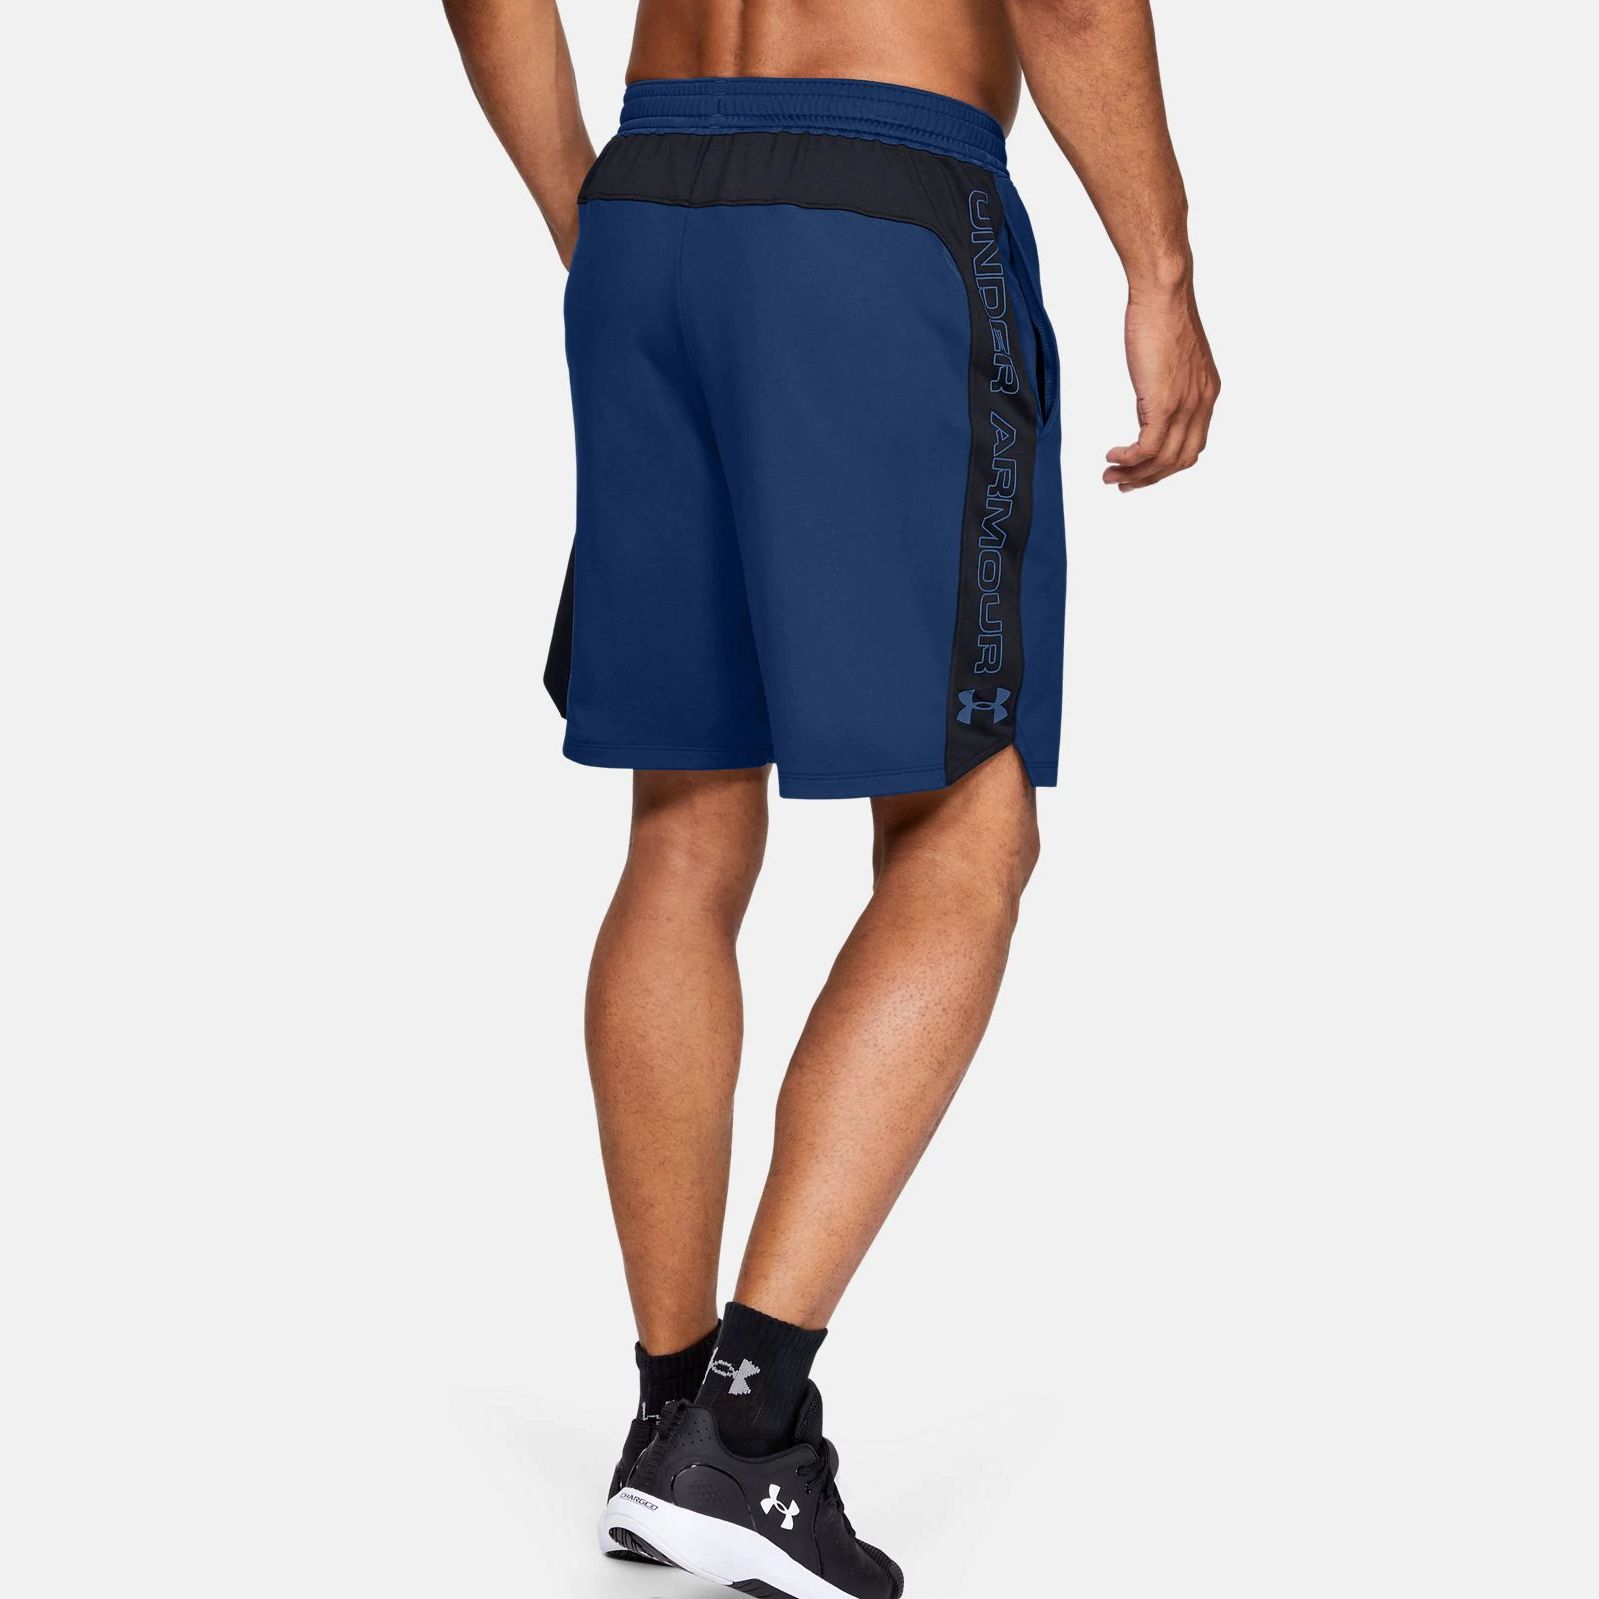 Shorts | Clothing Under armour Graphic Shorts 1658 |